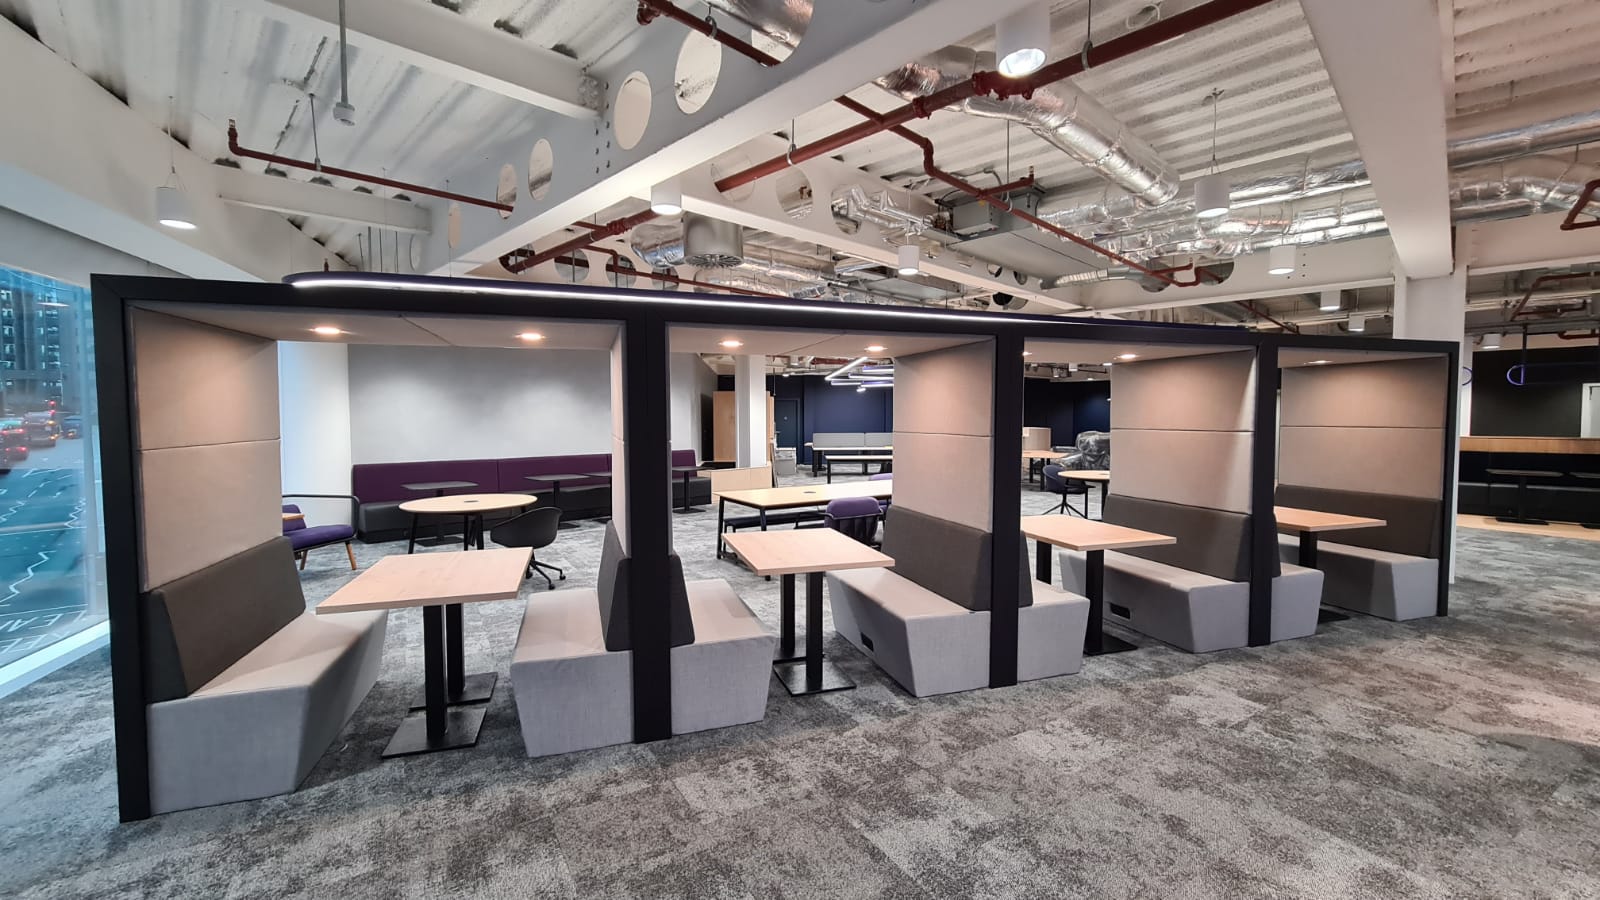 Shack Meeting Booths at Workagile's London showroom